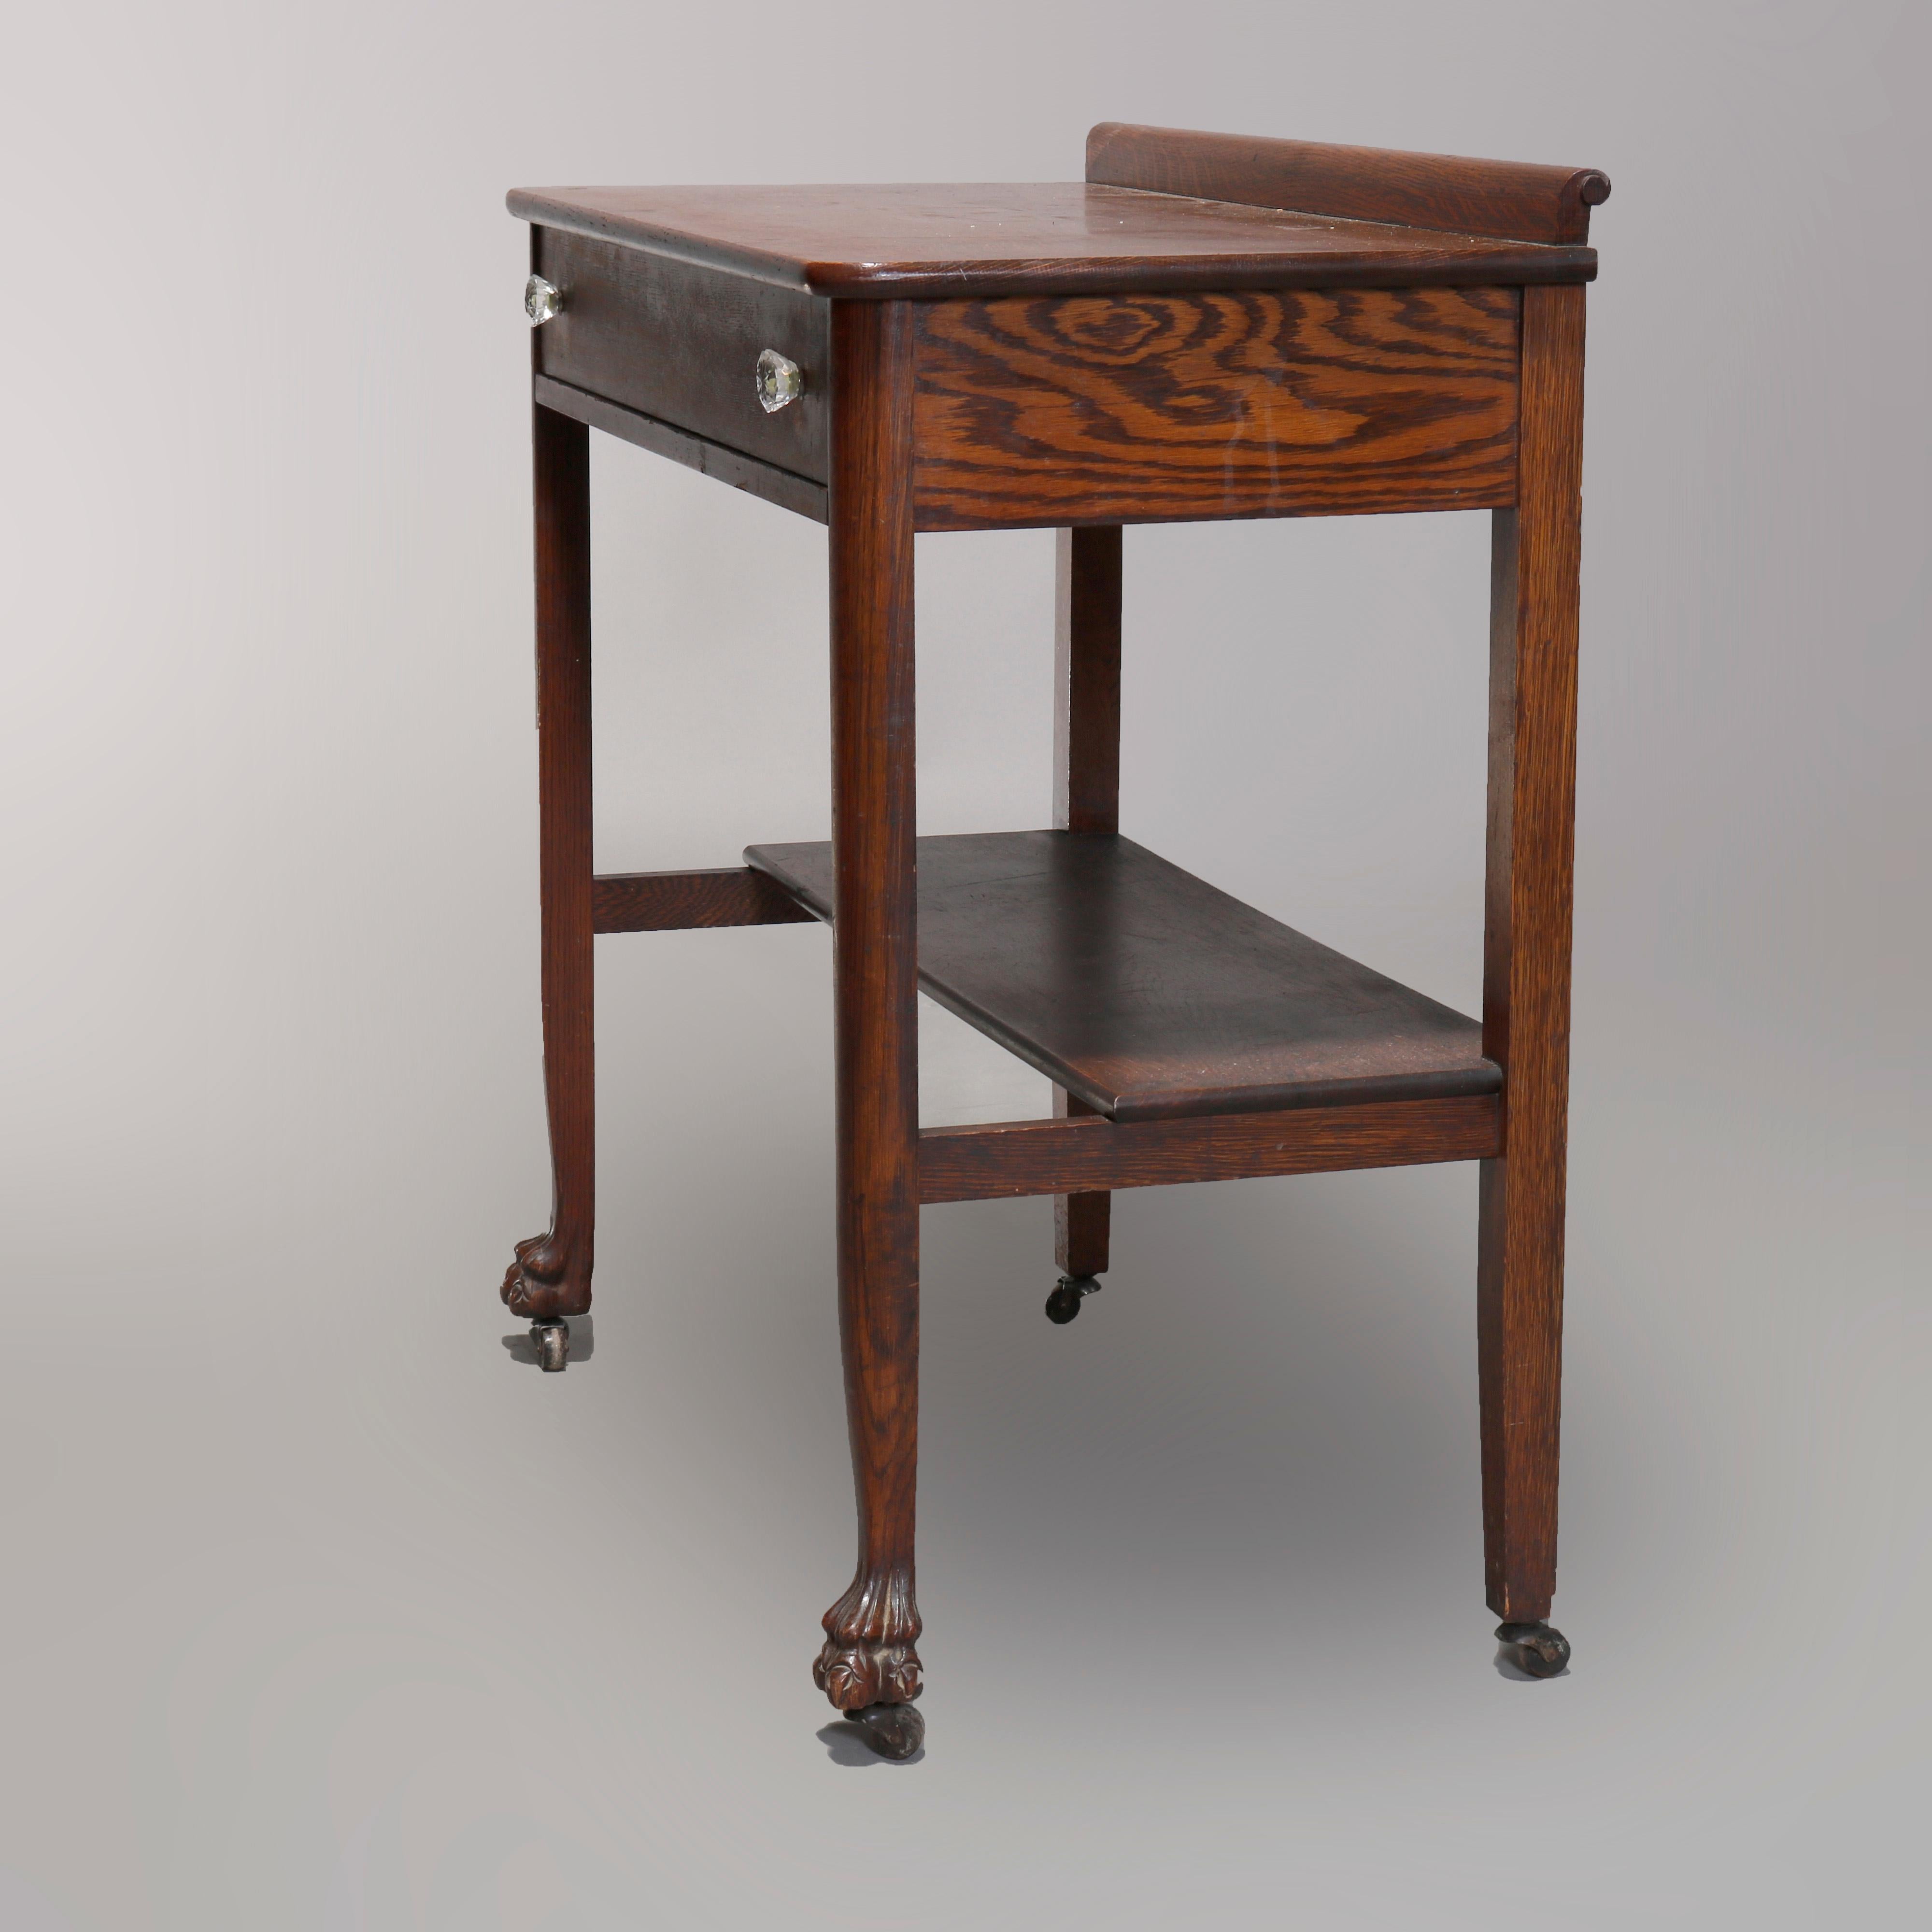 An antique server in the manner of R.J. Horner offers oak construction with backsplash surmounting single drawer case having lower shelf and carved paw feet, circa 1900.

Measures: 34